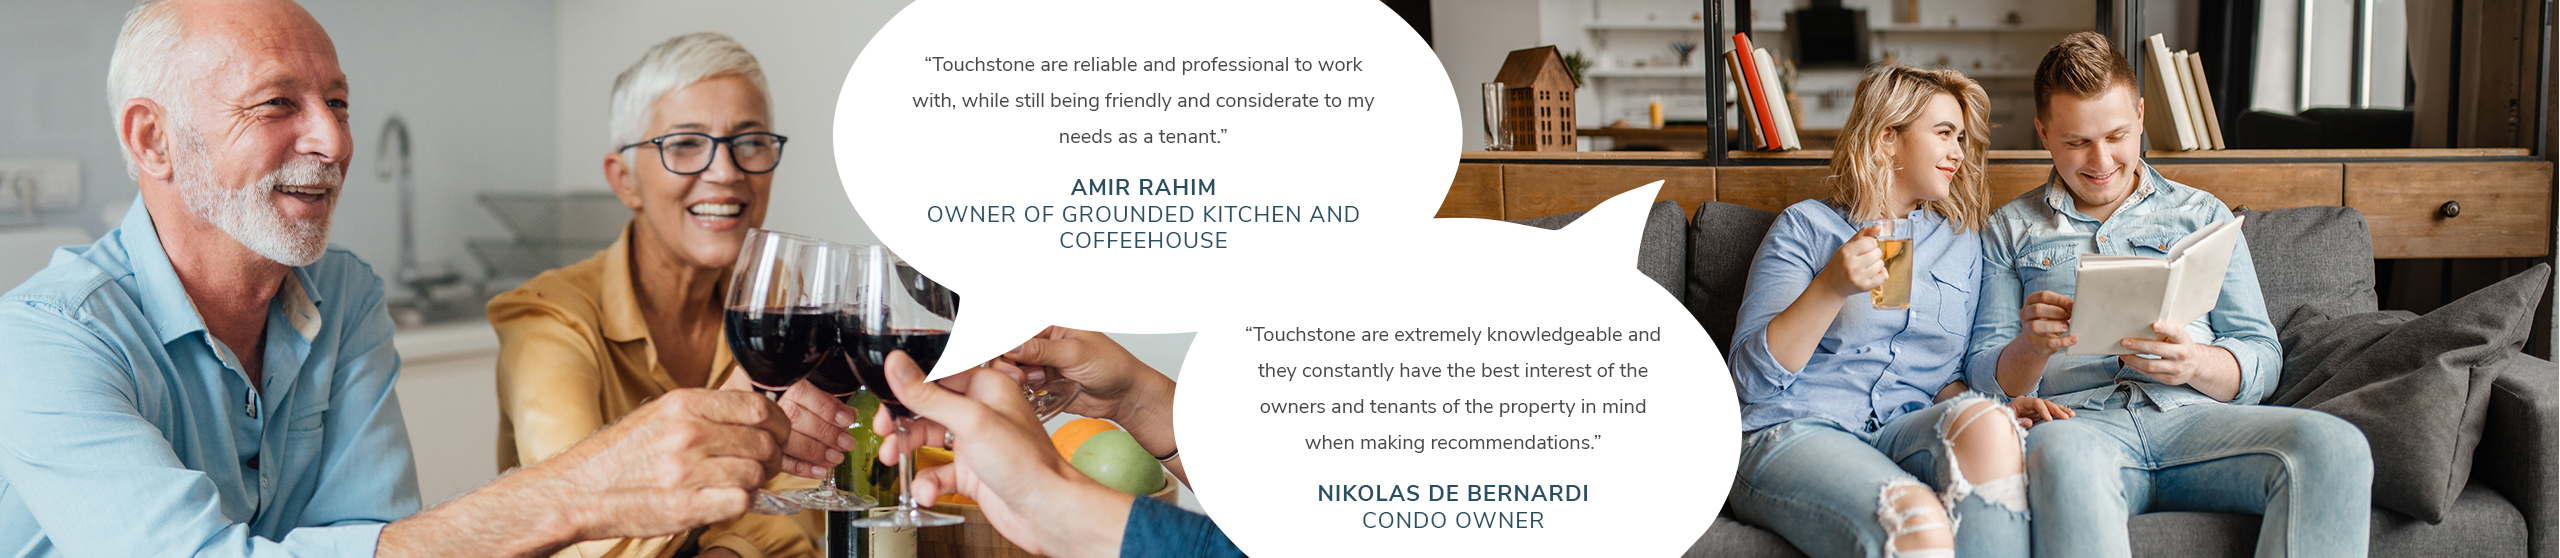 “Touchstone are extremely knowledgeable and they constantly have the best interest of the owners and tenants of the property in mind when making recommendations.”- Nikolas De Bernardi, Condo Owner. Touchstone are reliable and professional to work with, while still being friendly and considerate to my needs as a tenant.” – Amir Rahim, Owner of Grounded Kitchen and Coffeehouse